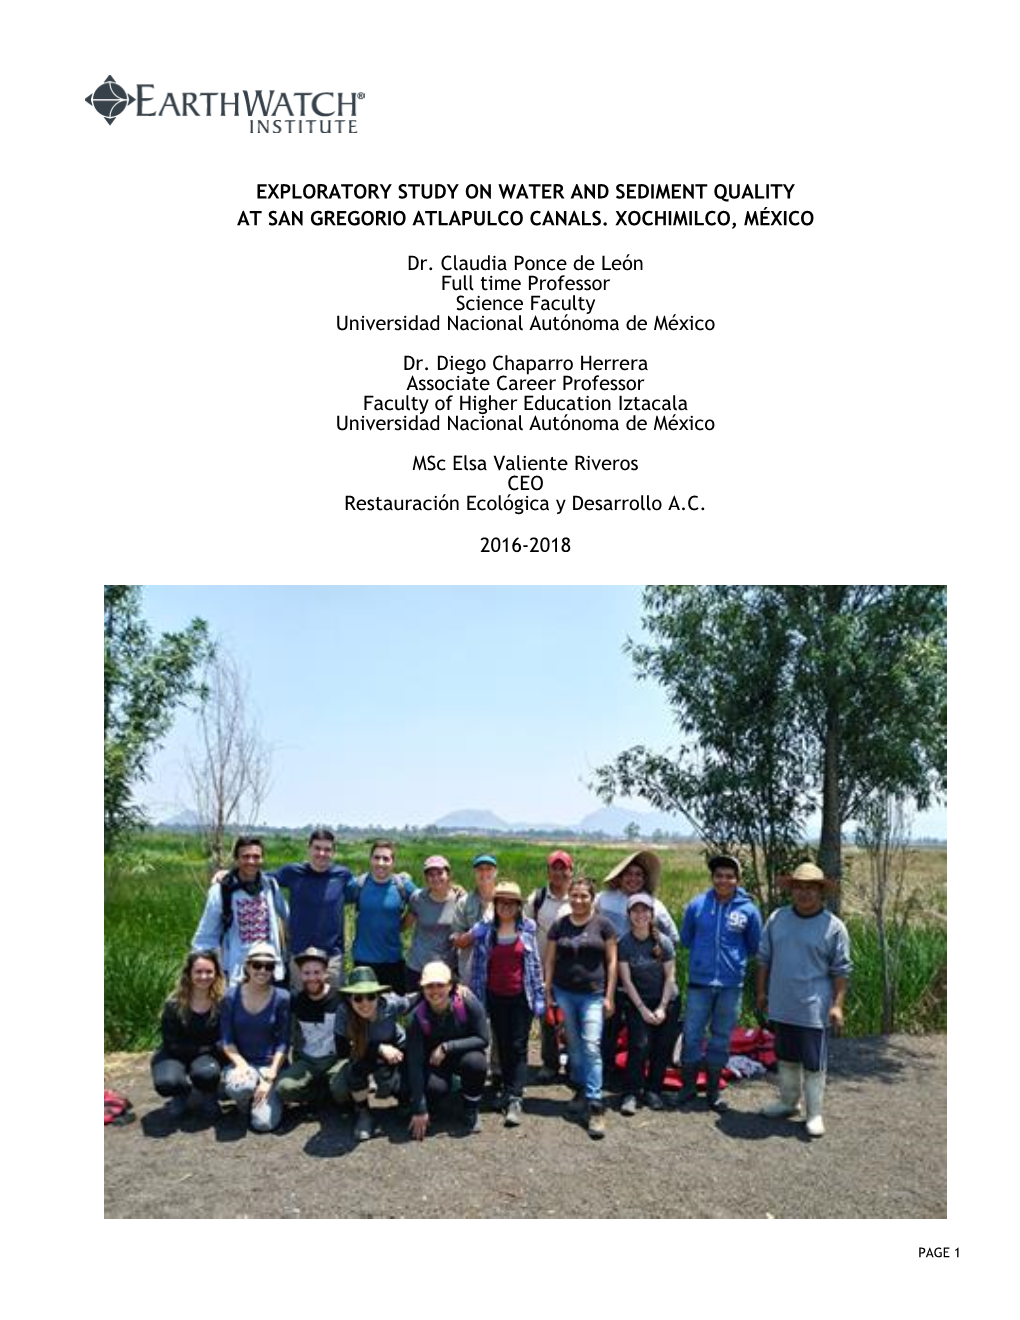 Exploratory Study on Water and Sediment Quality at San Gregorio Atlapulco Canals